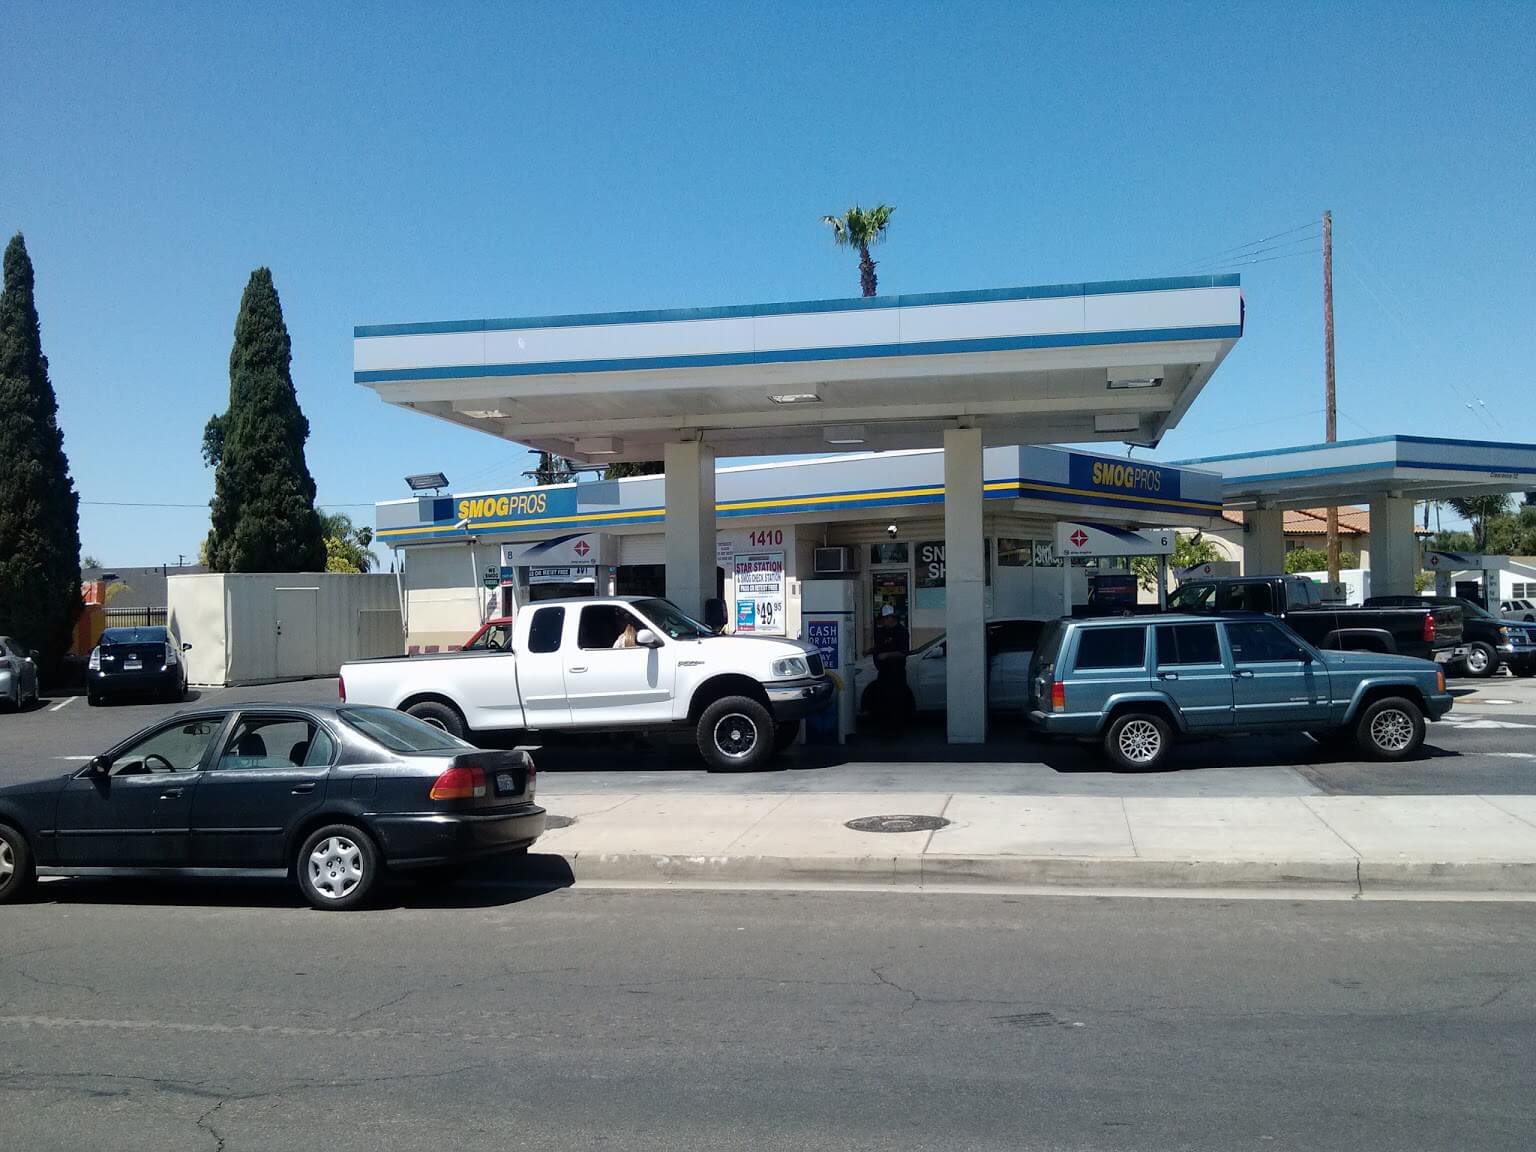 $20 Smog Coupon STAR Station Smog Pros in San Diego CA 92110